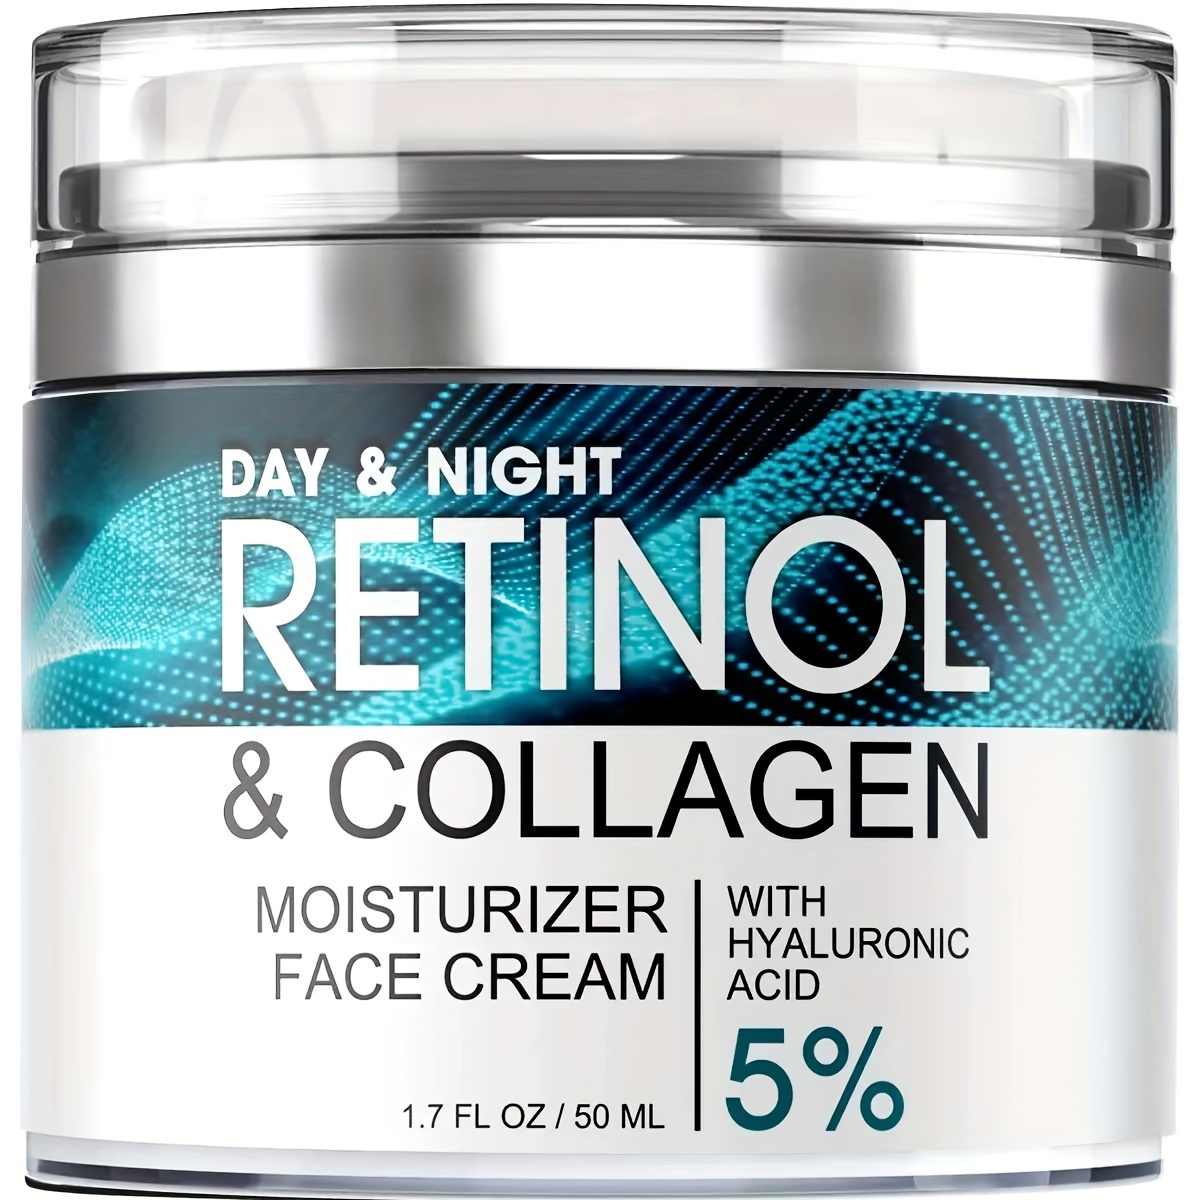 

1pc 50ml Retinol Moisturizing Cream, Face Moisturizer With Collagen, Hyaluronic Acid, Vitamin C+e, Soothes Dry Skin, Improves Elasticity, Hydrating Face Lotion For Women And Men